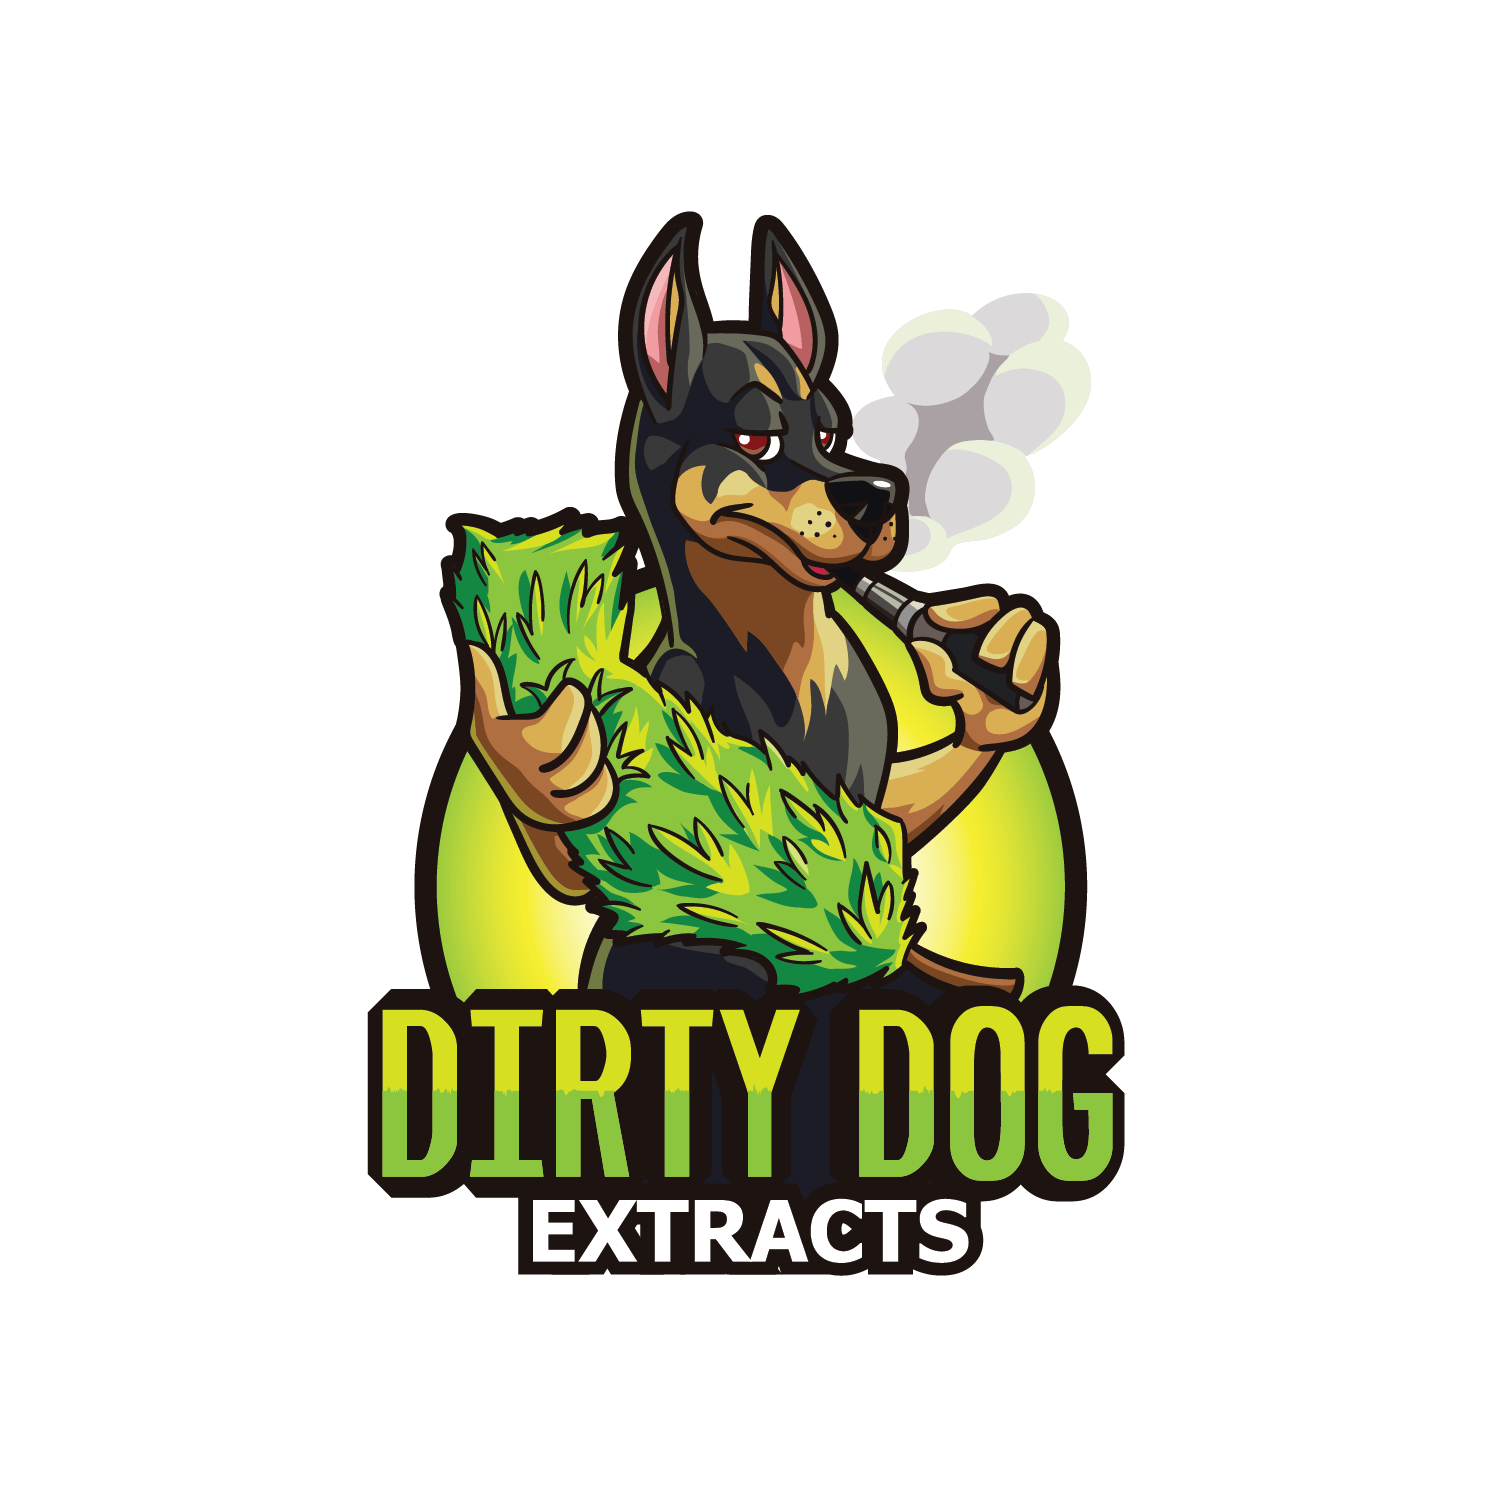 Medical Signs and Logo - Elegant, Playful, Medical Logo Design for Dirty Dog Extracts